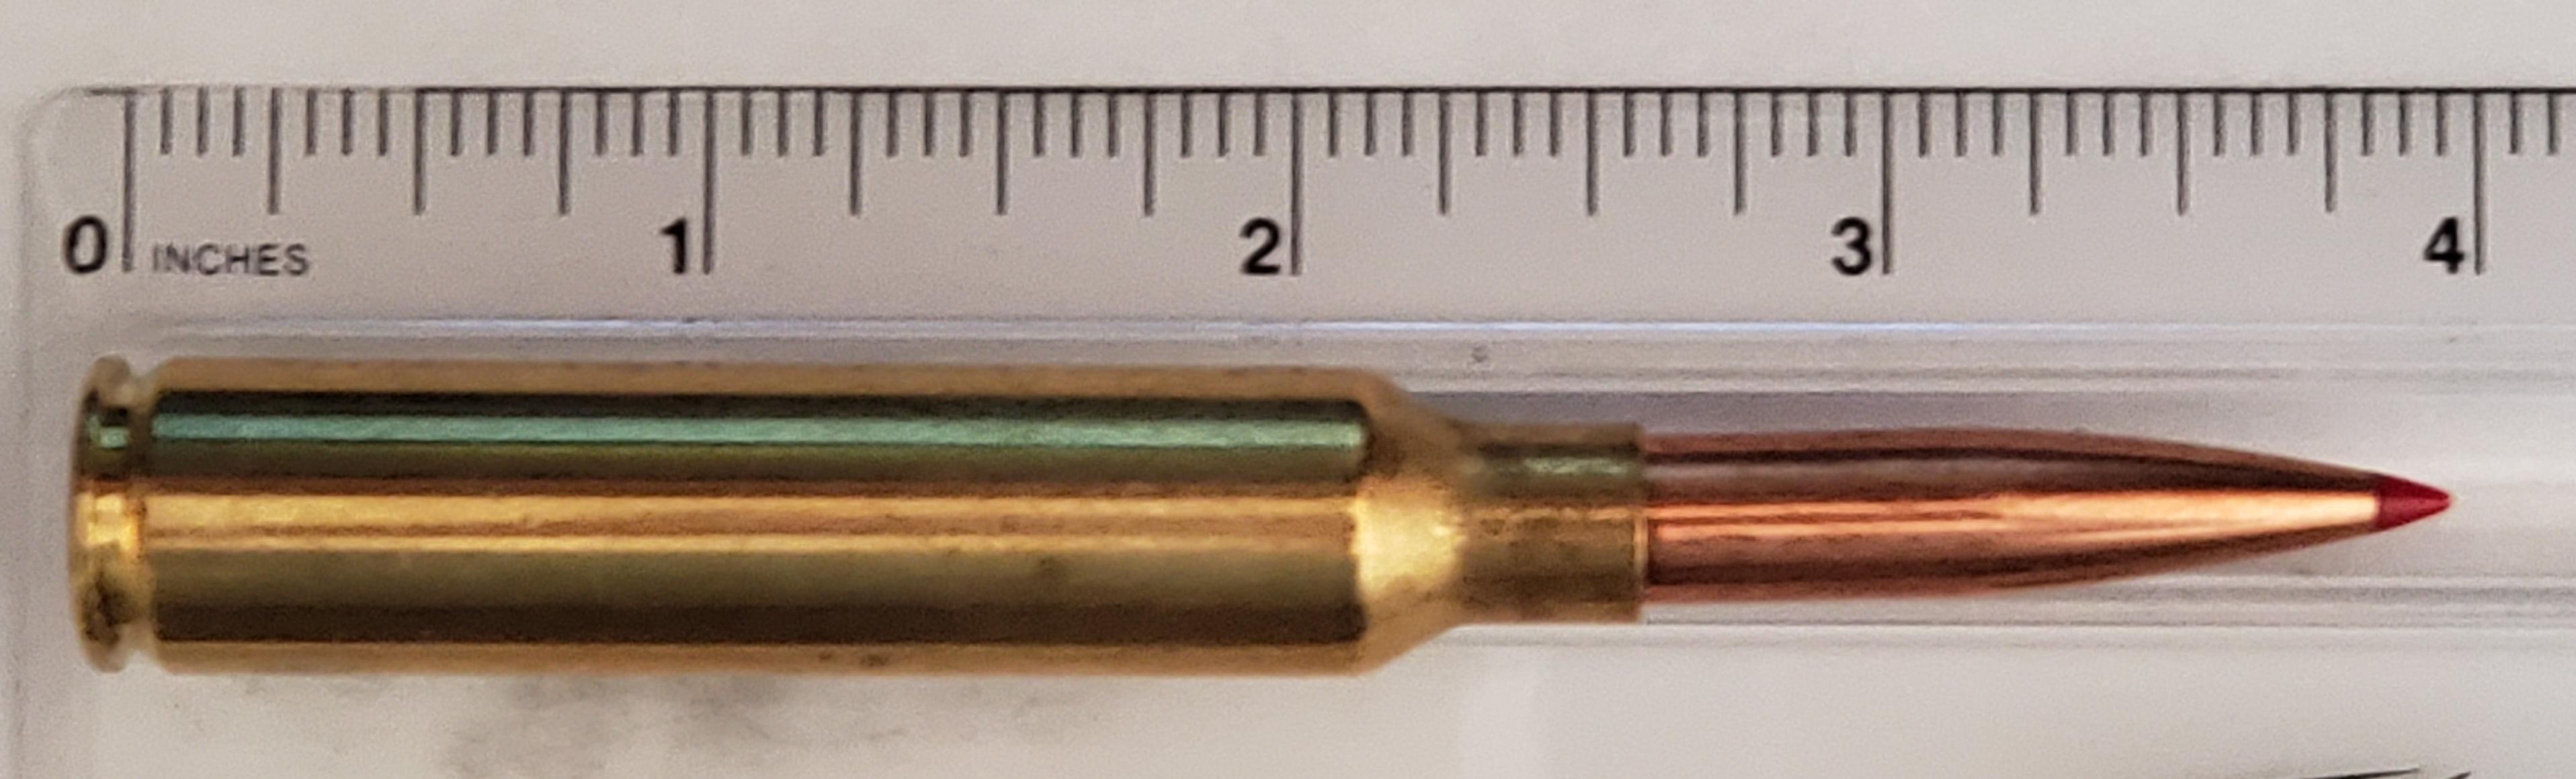 3.9" Long OAL the 7mm PRC would be a Monster and way too long. 